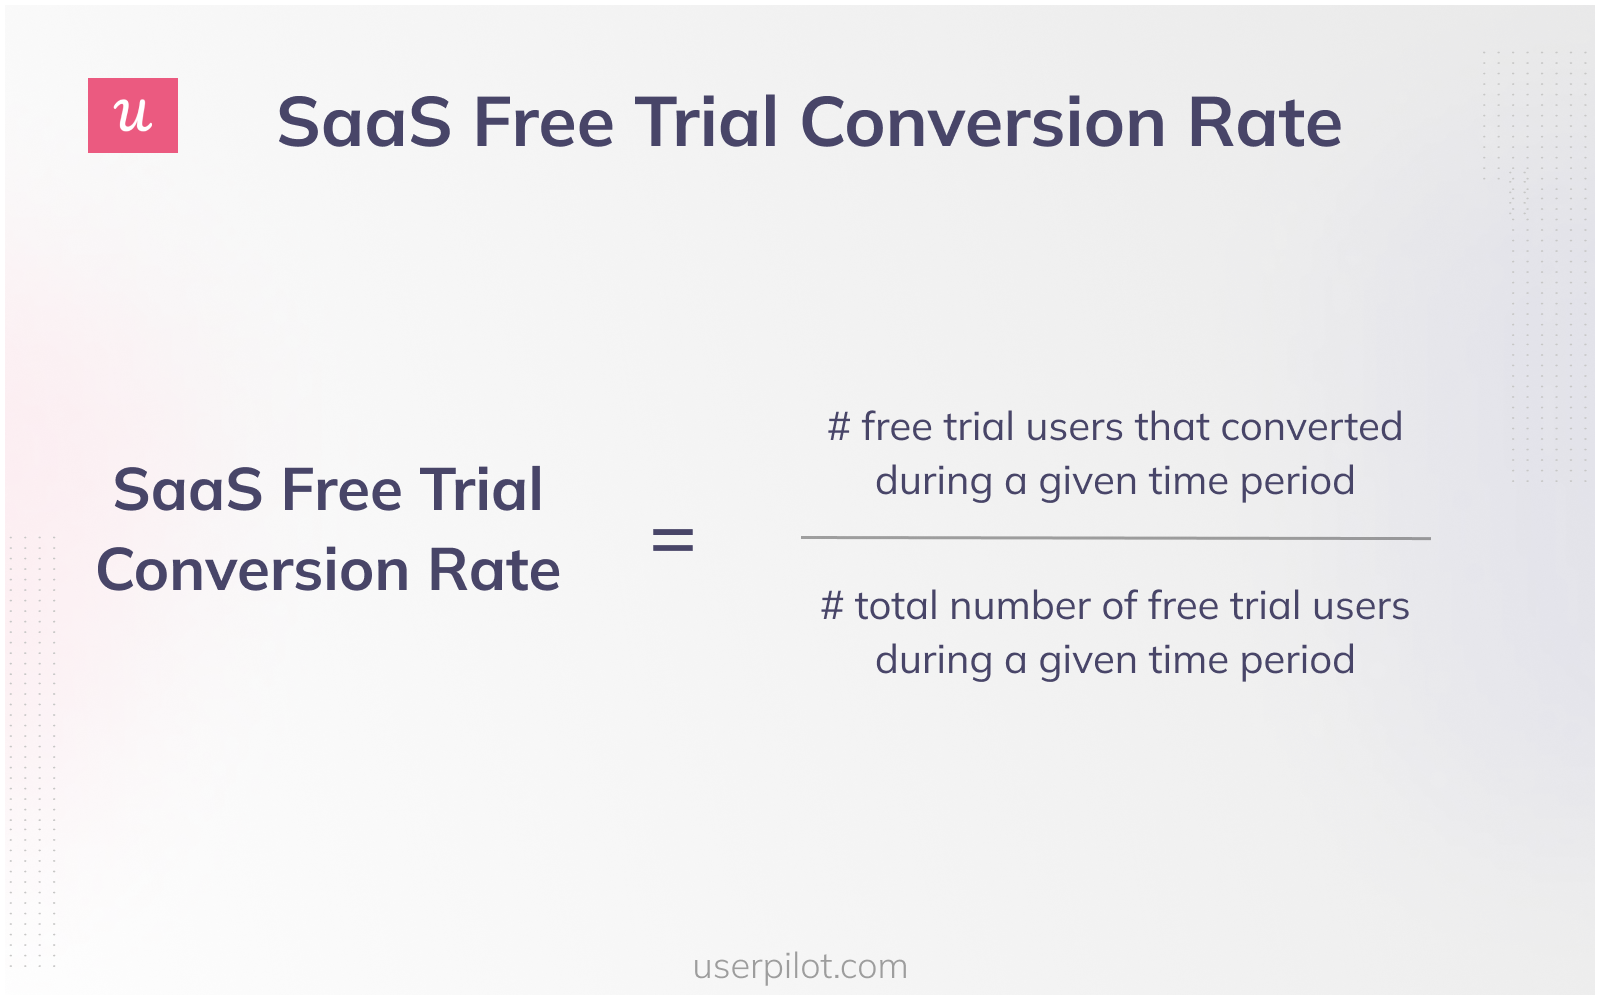 Free trial conversion rate calculation